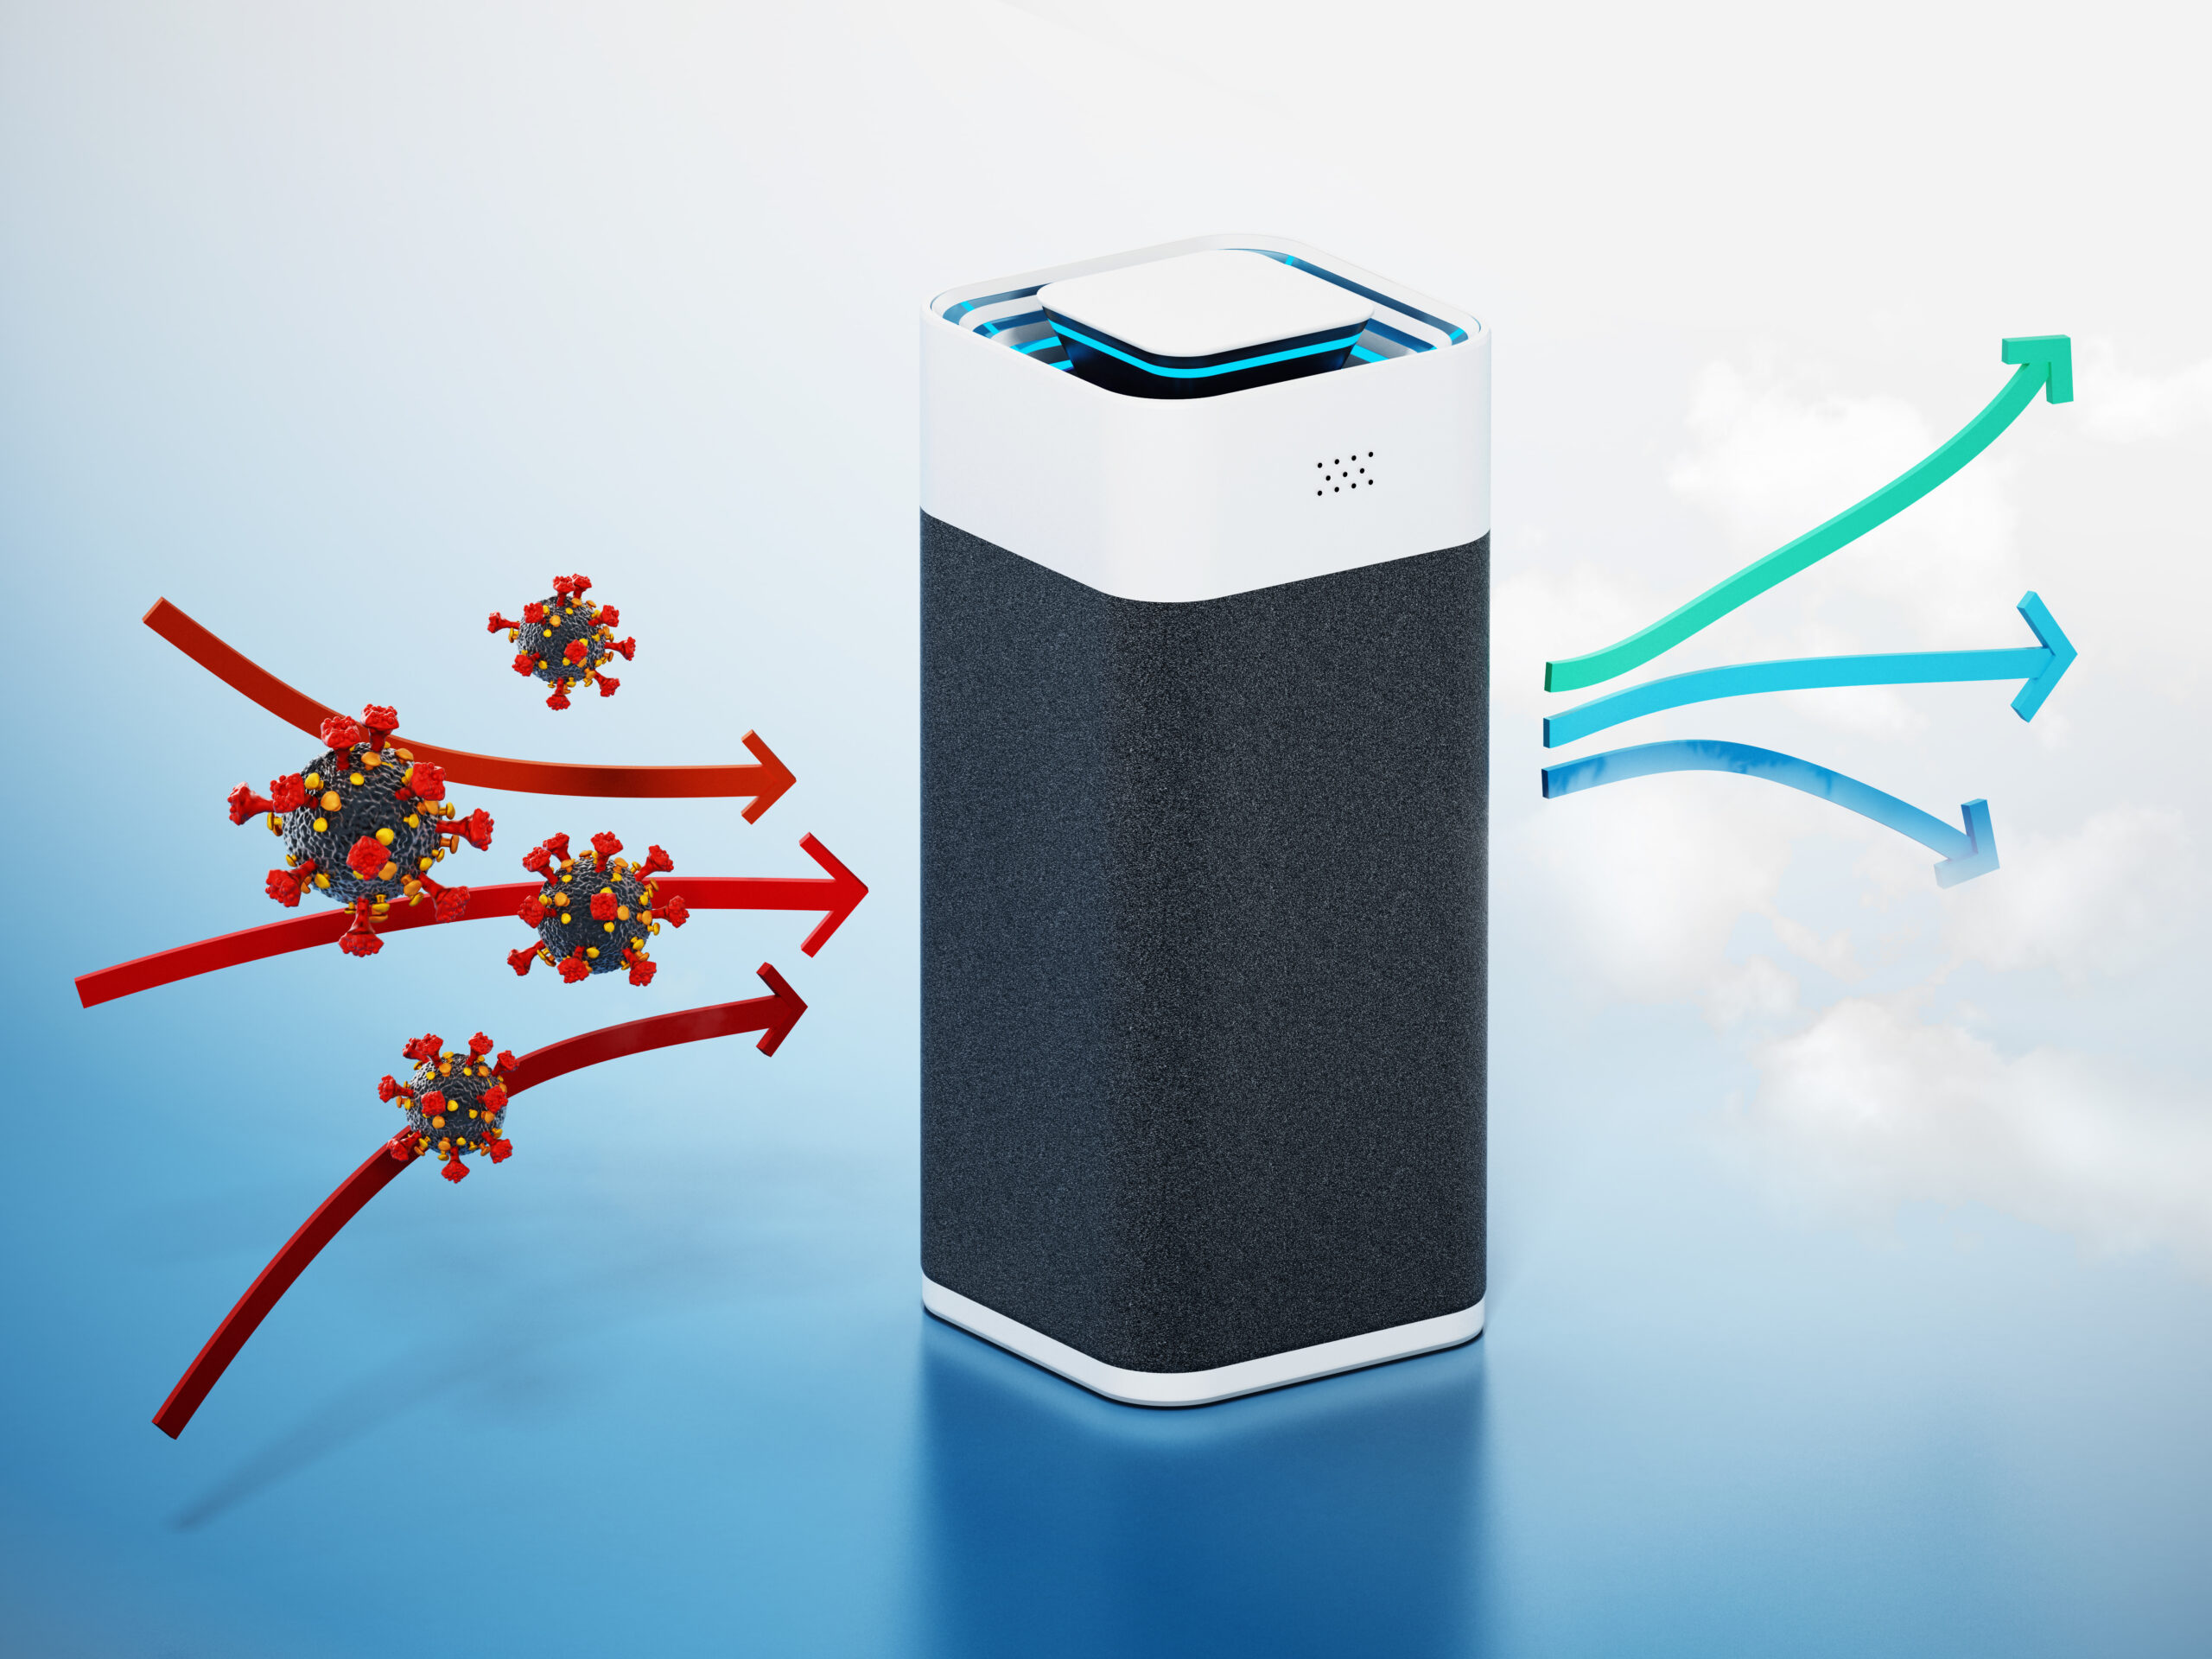 Do Air Purifiers Work? Research, Best Practices, and More